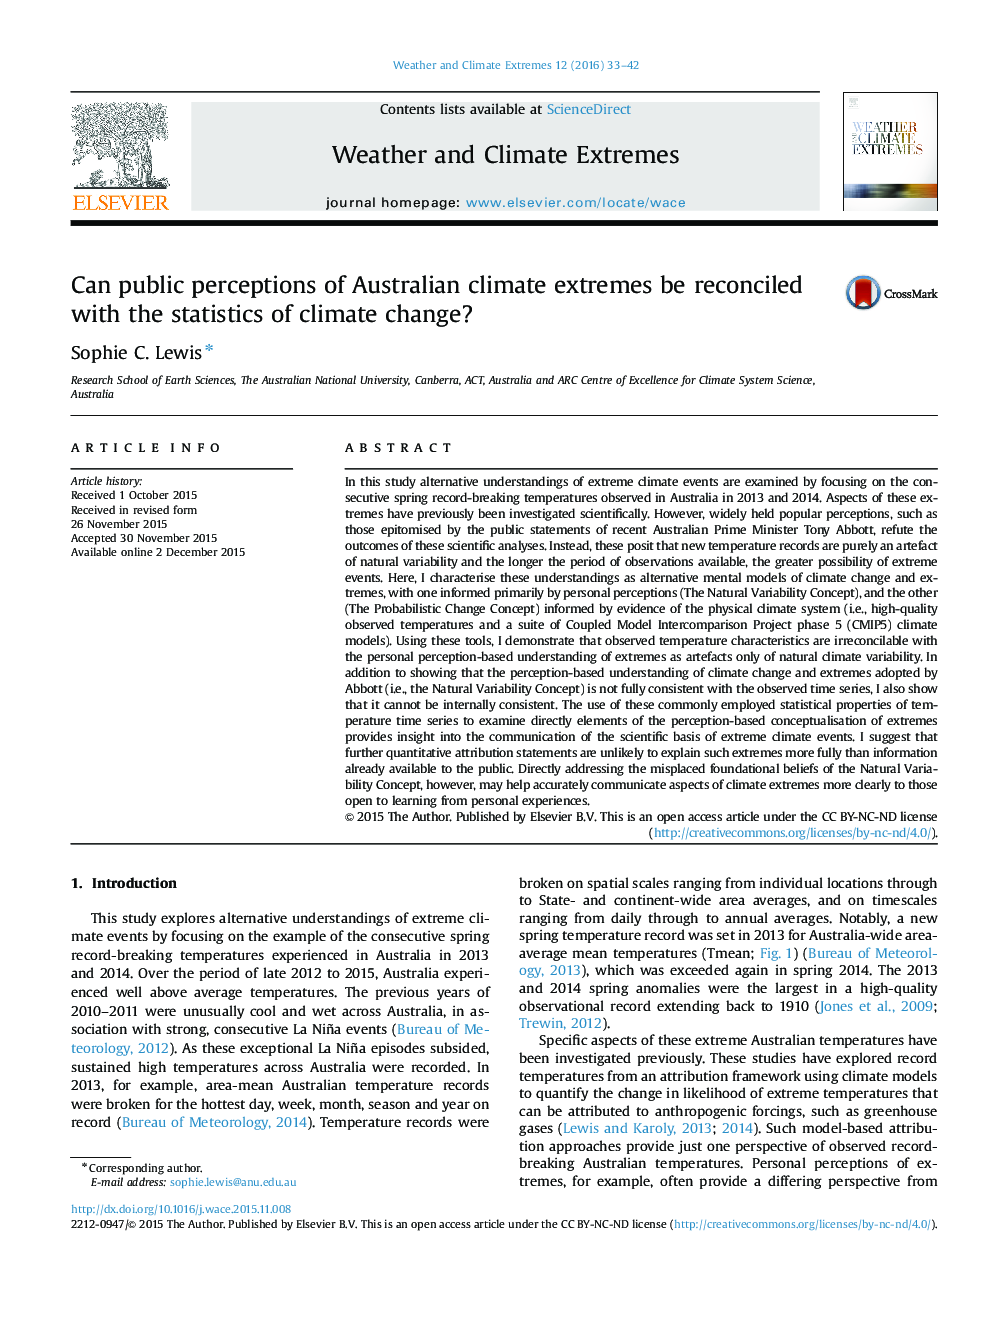 Can public perceptions of Australian climate extremes be reconciled with the statistics of climate change?